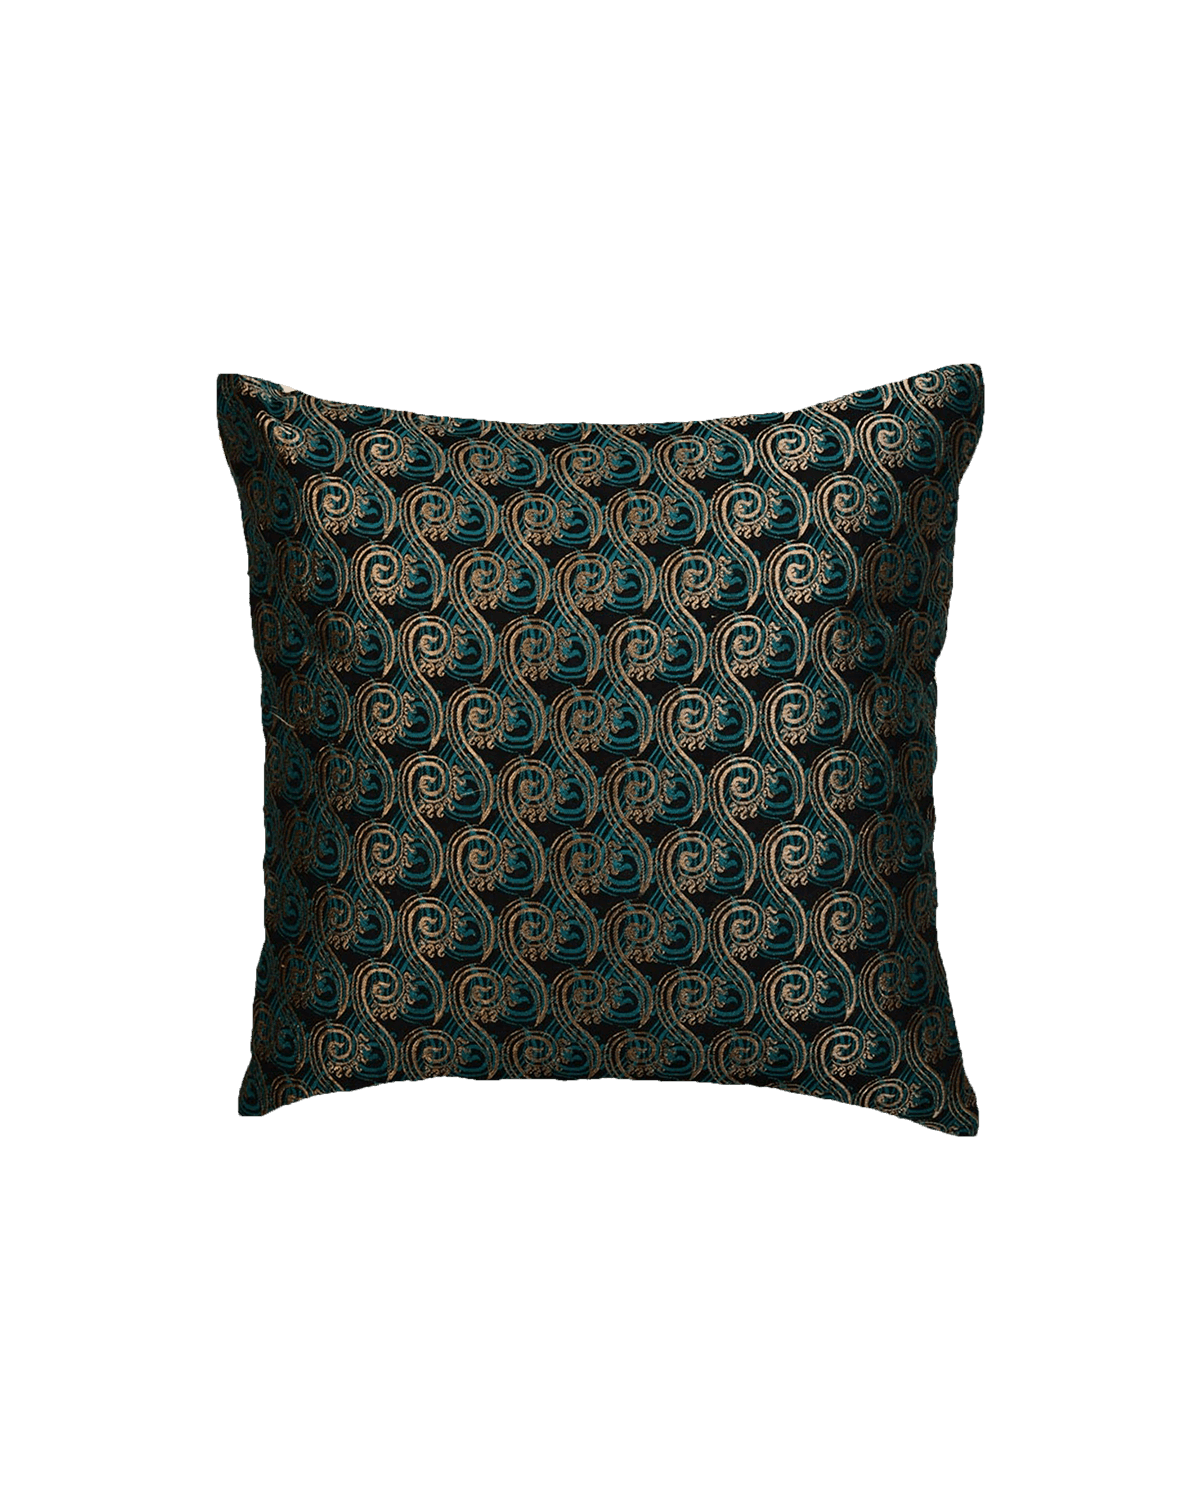 Green On Black Brocade Handwoven Silk Cushion Cover with Satin Back 16" - By HolyWeaves, Benares